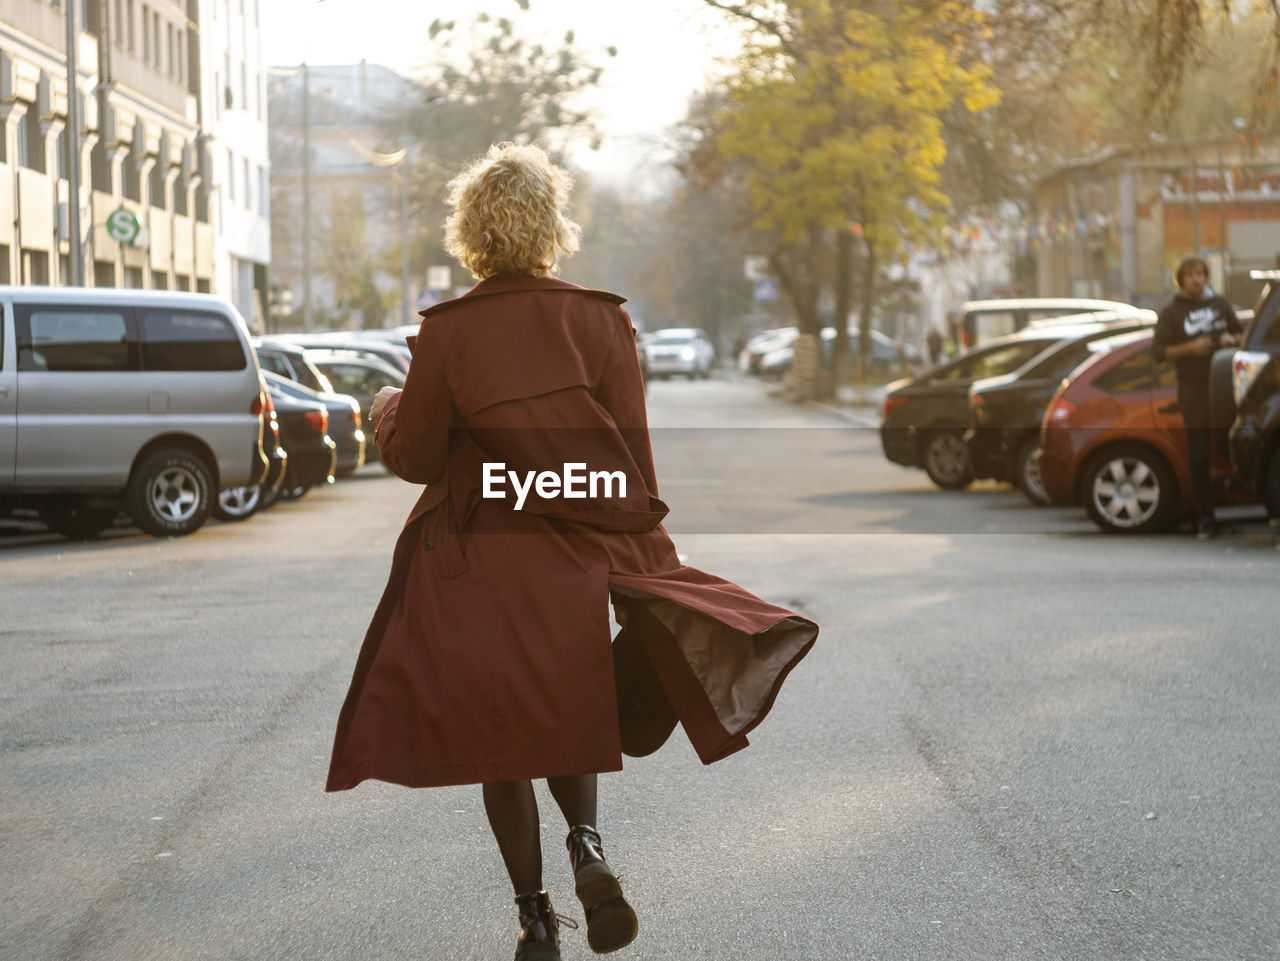 Young woman with curly hair walking on city street at sunset wearing red coat